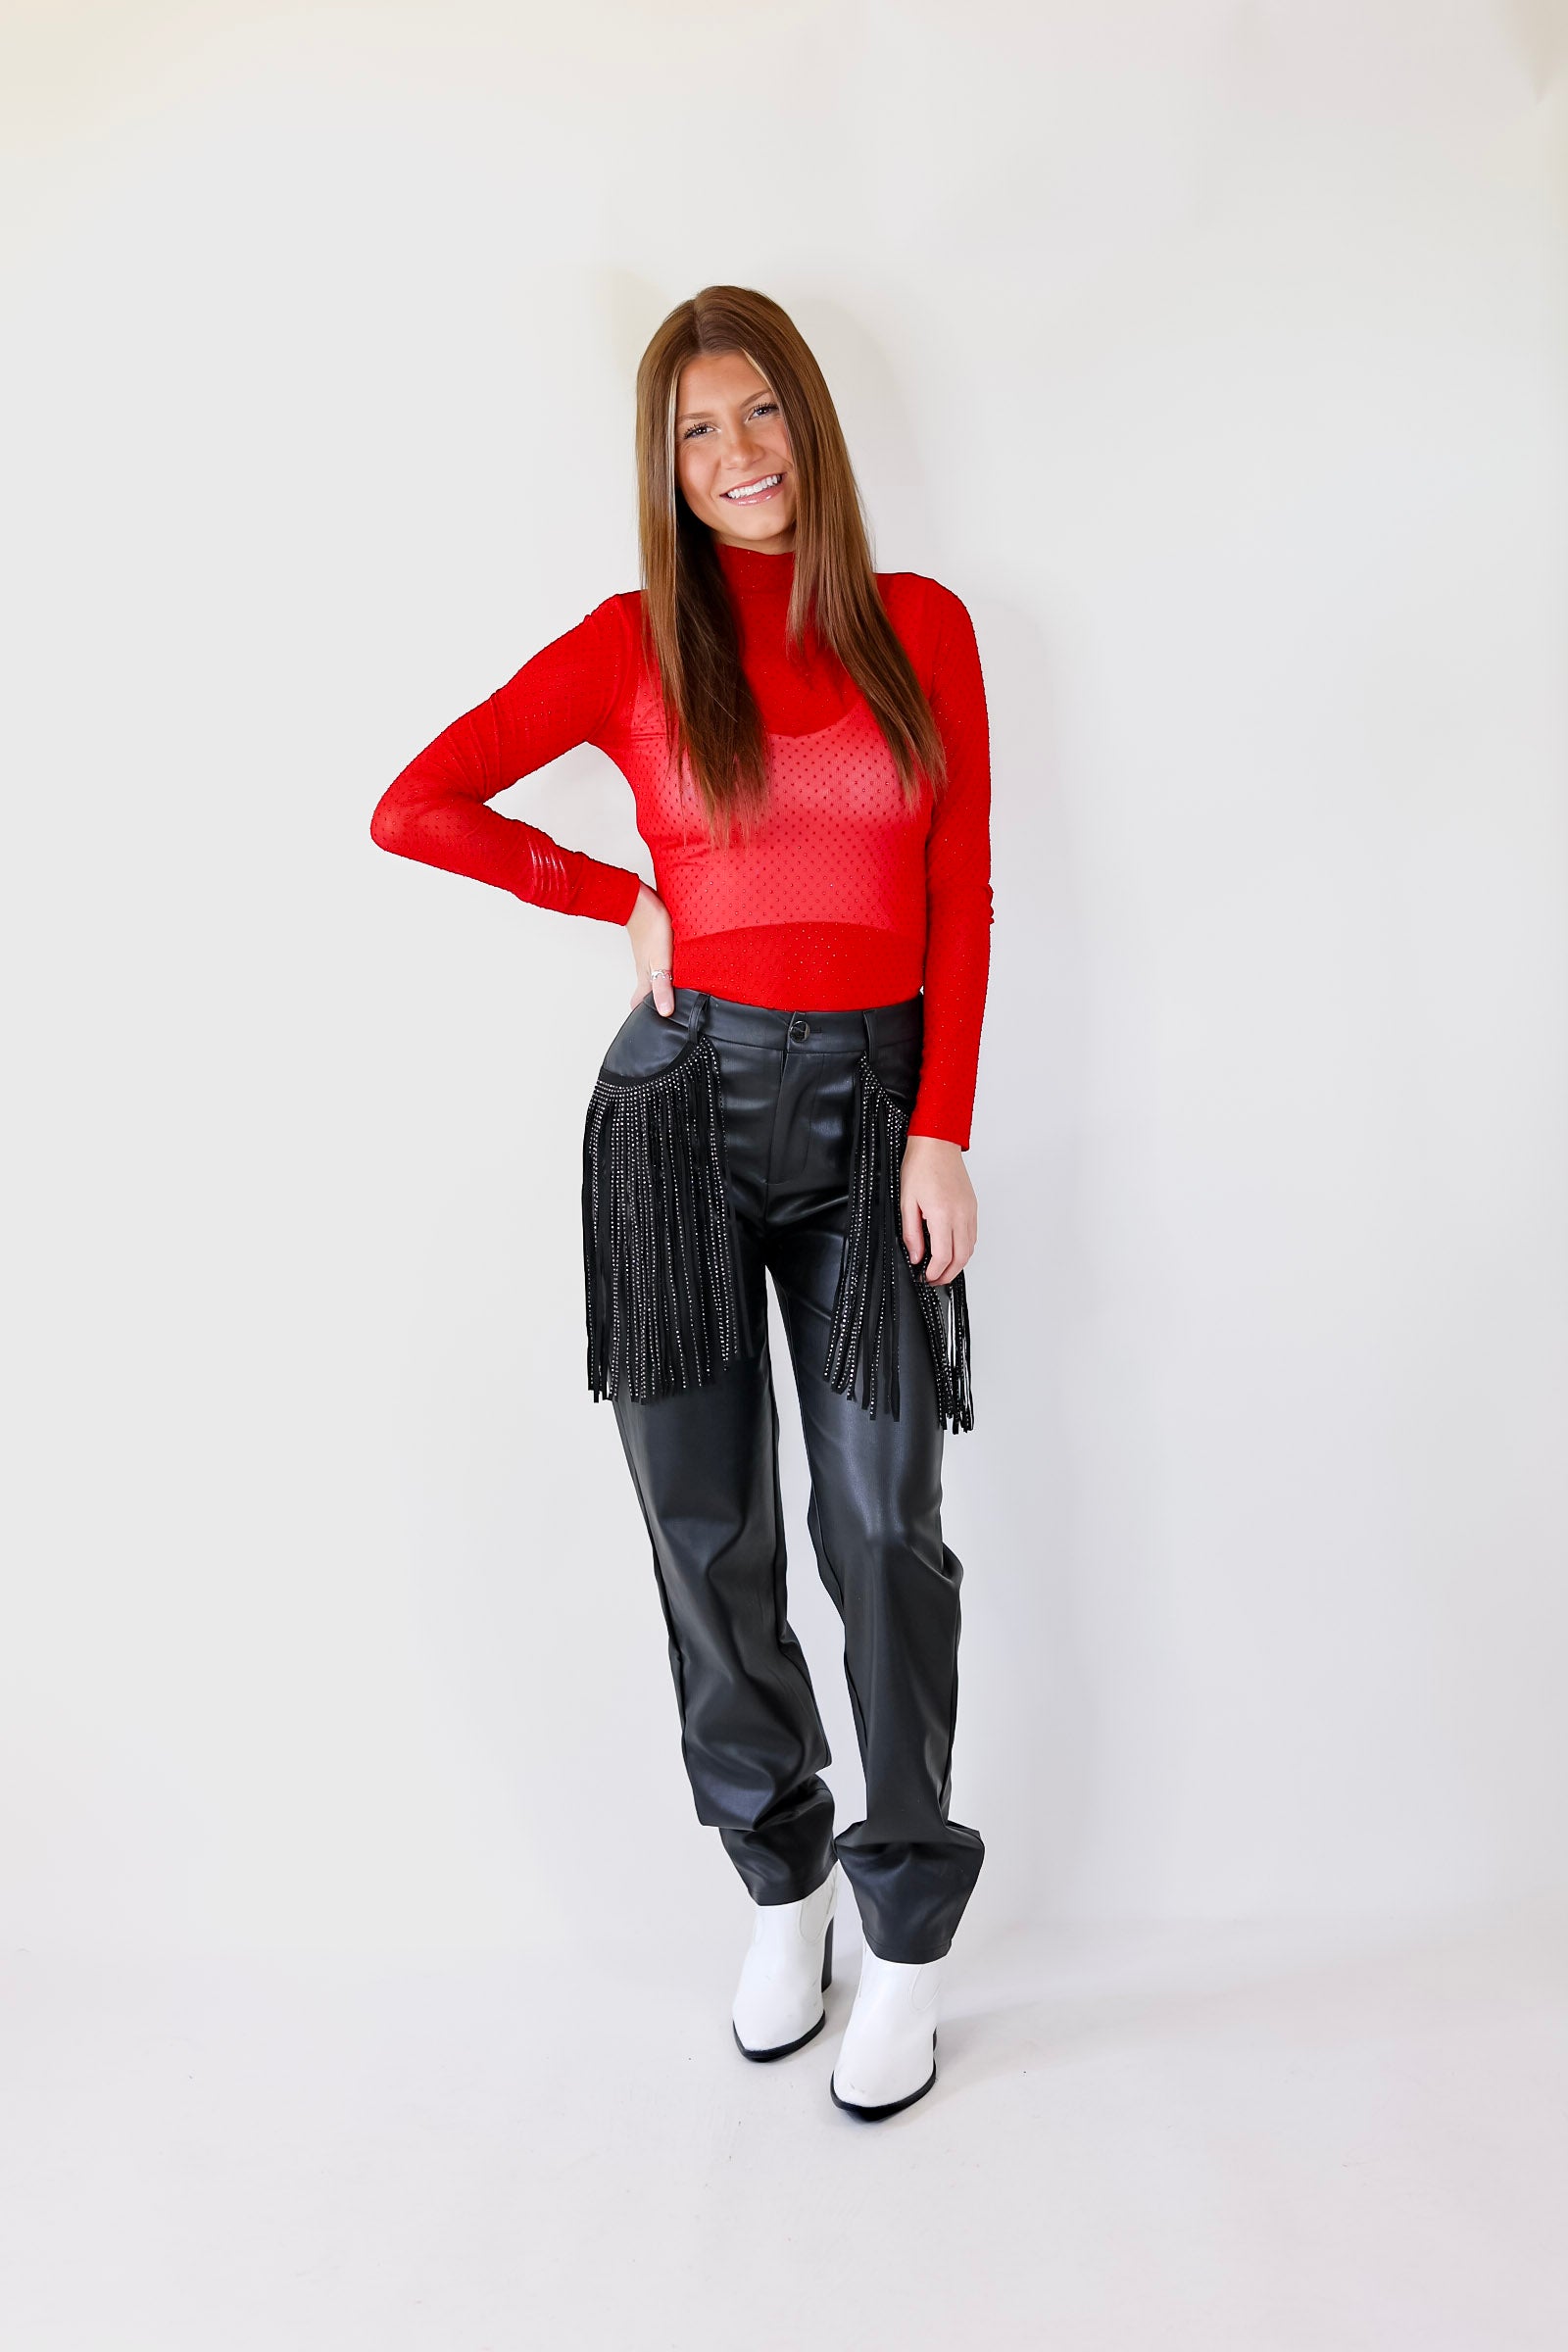 Try Your Luck Glitter Mesh Long Sleeve Bodysuit in Red - Giddy Up Glamour Boutique